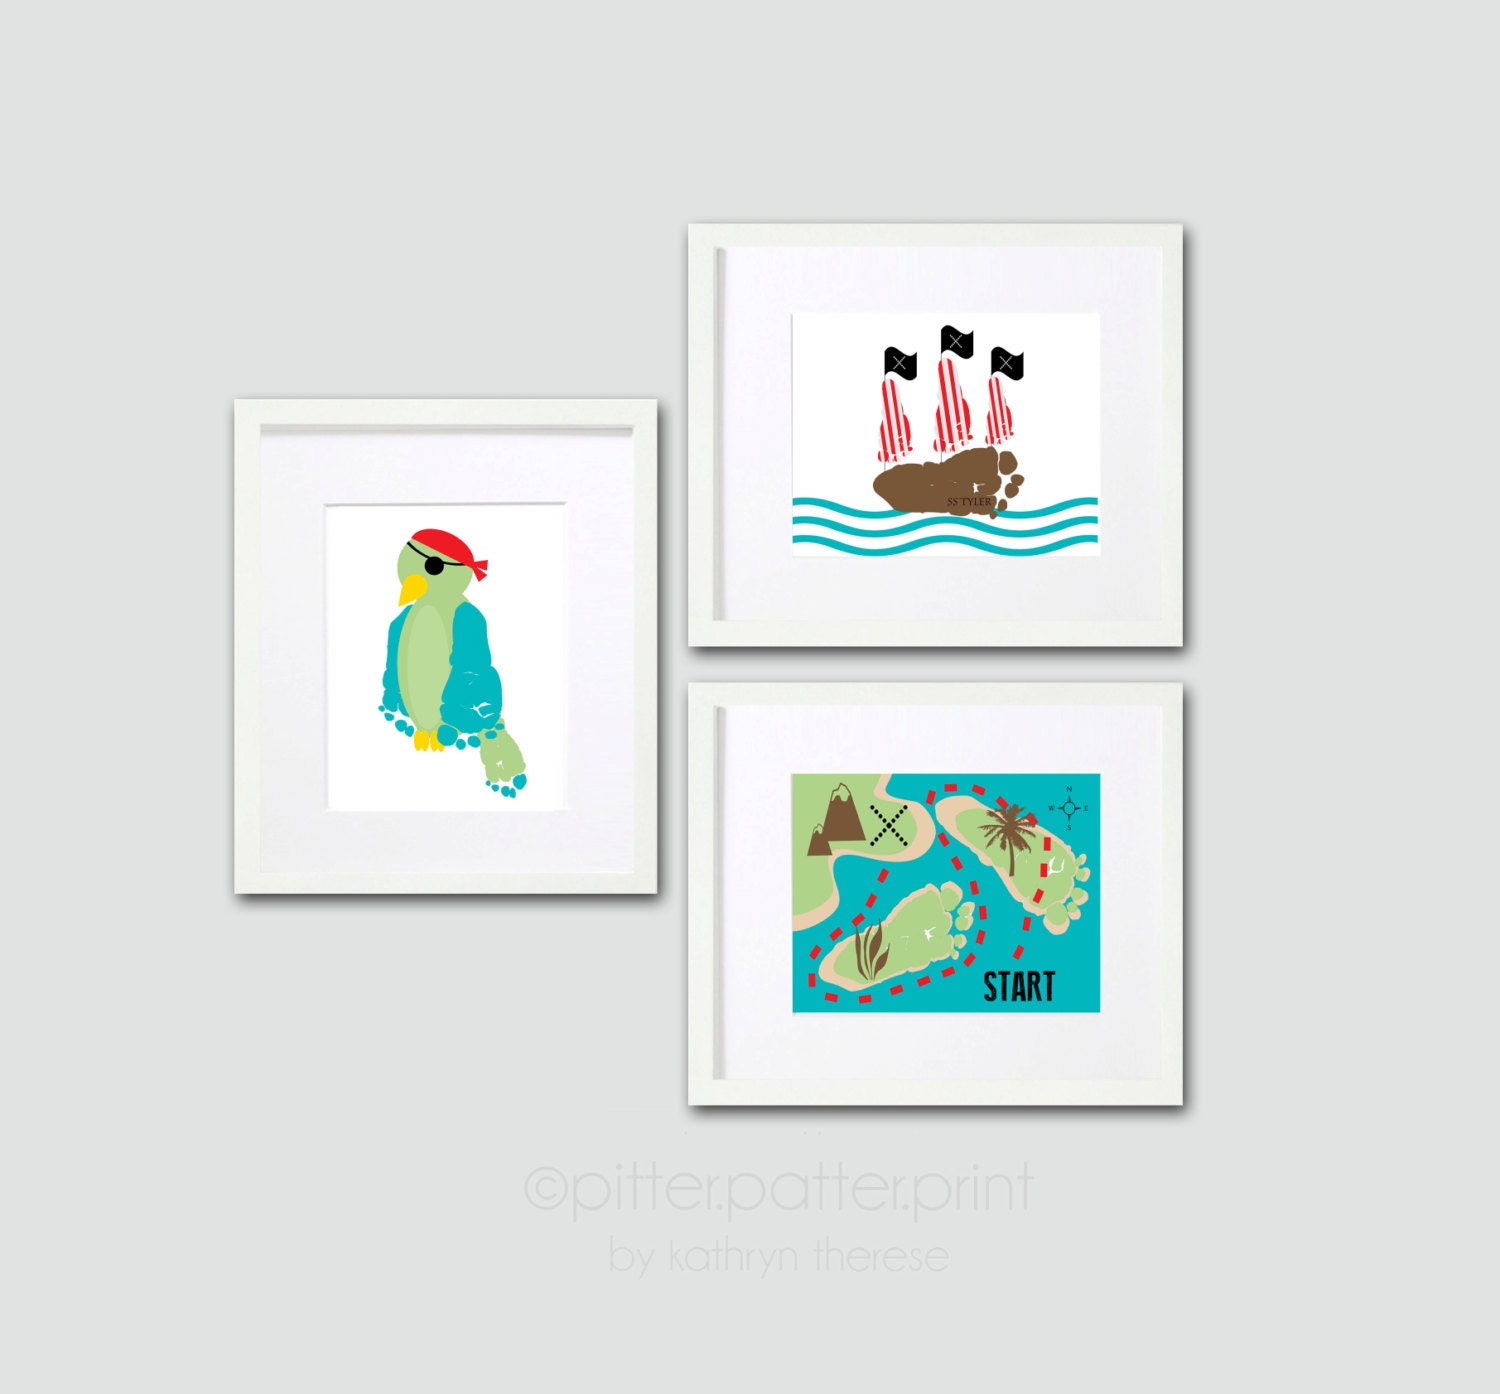 Popular items for kids pirate room on Etsy